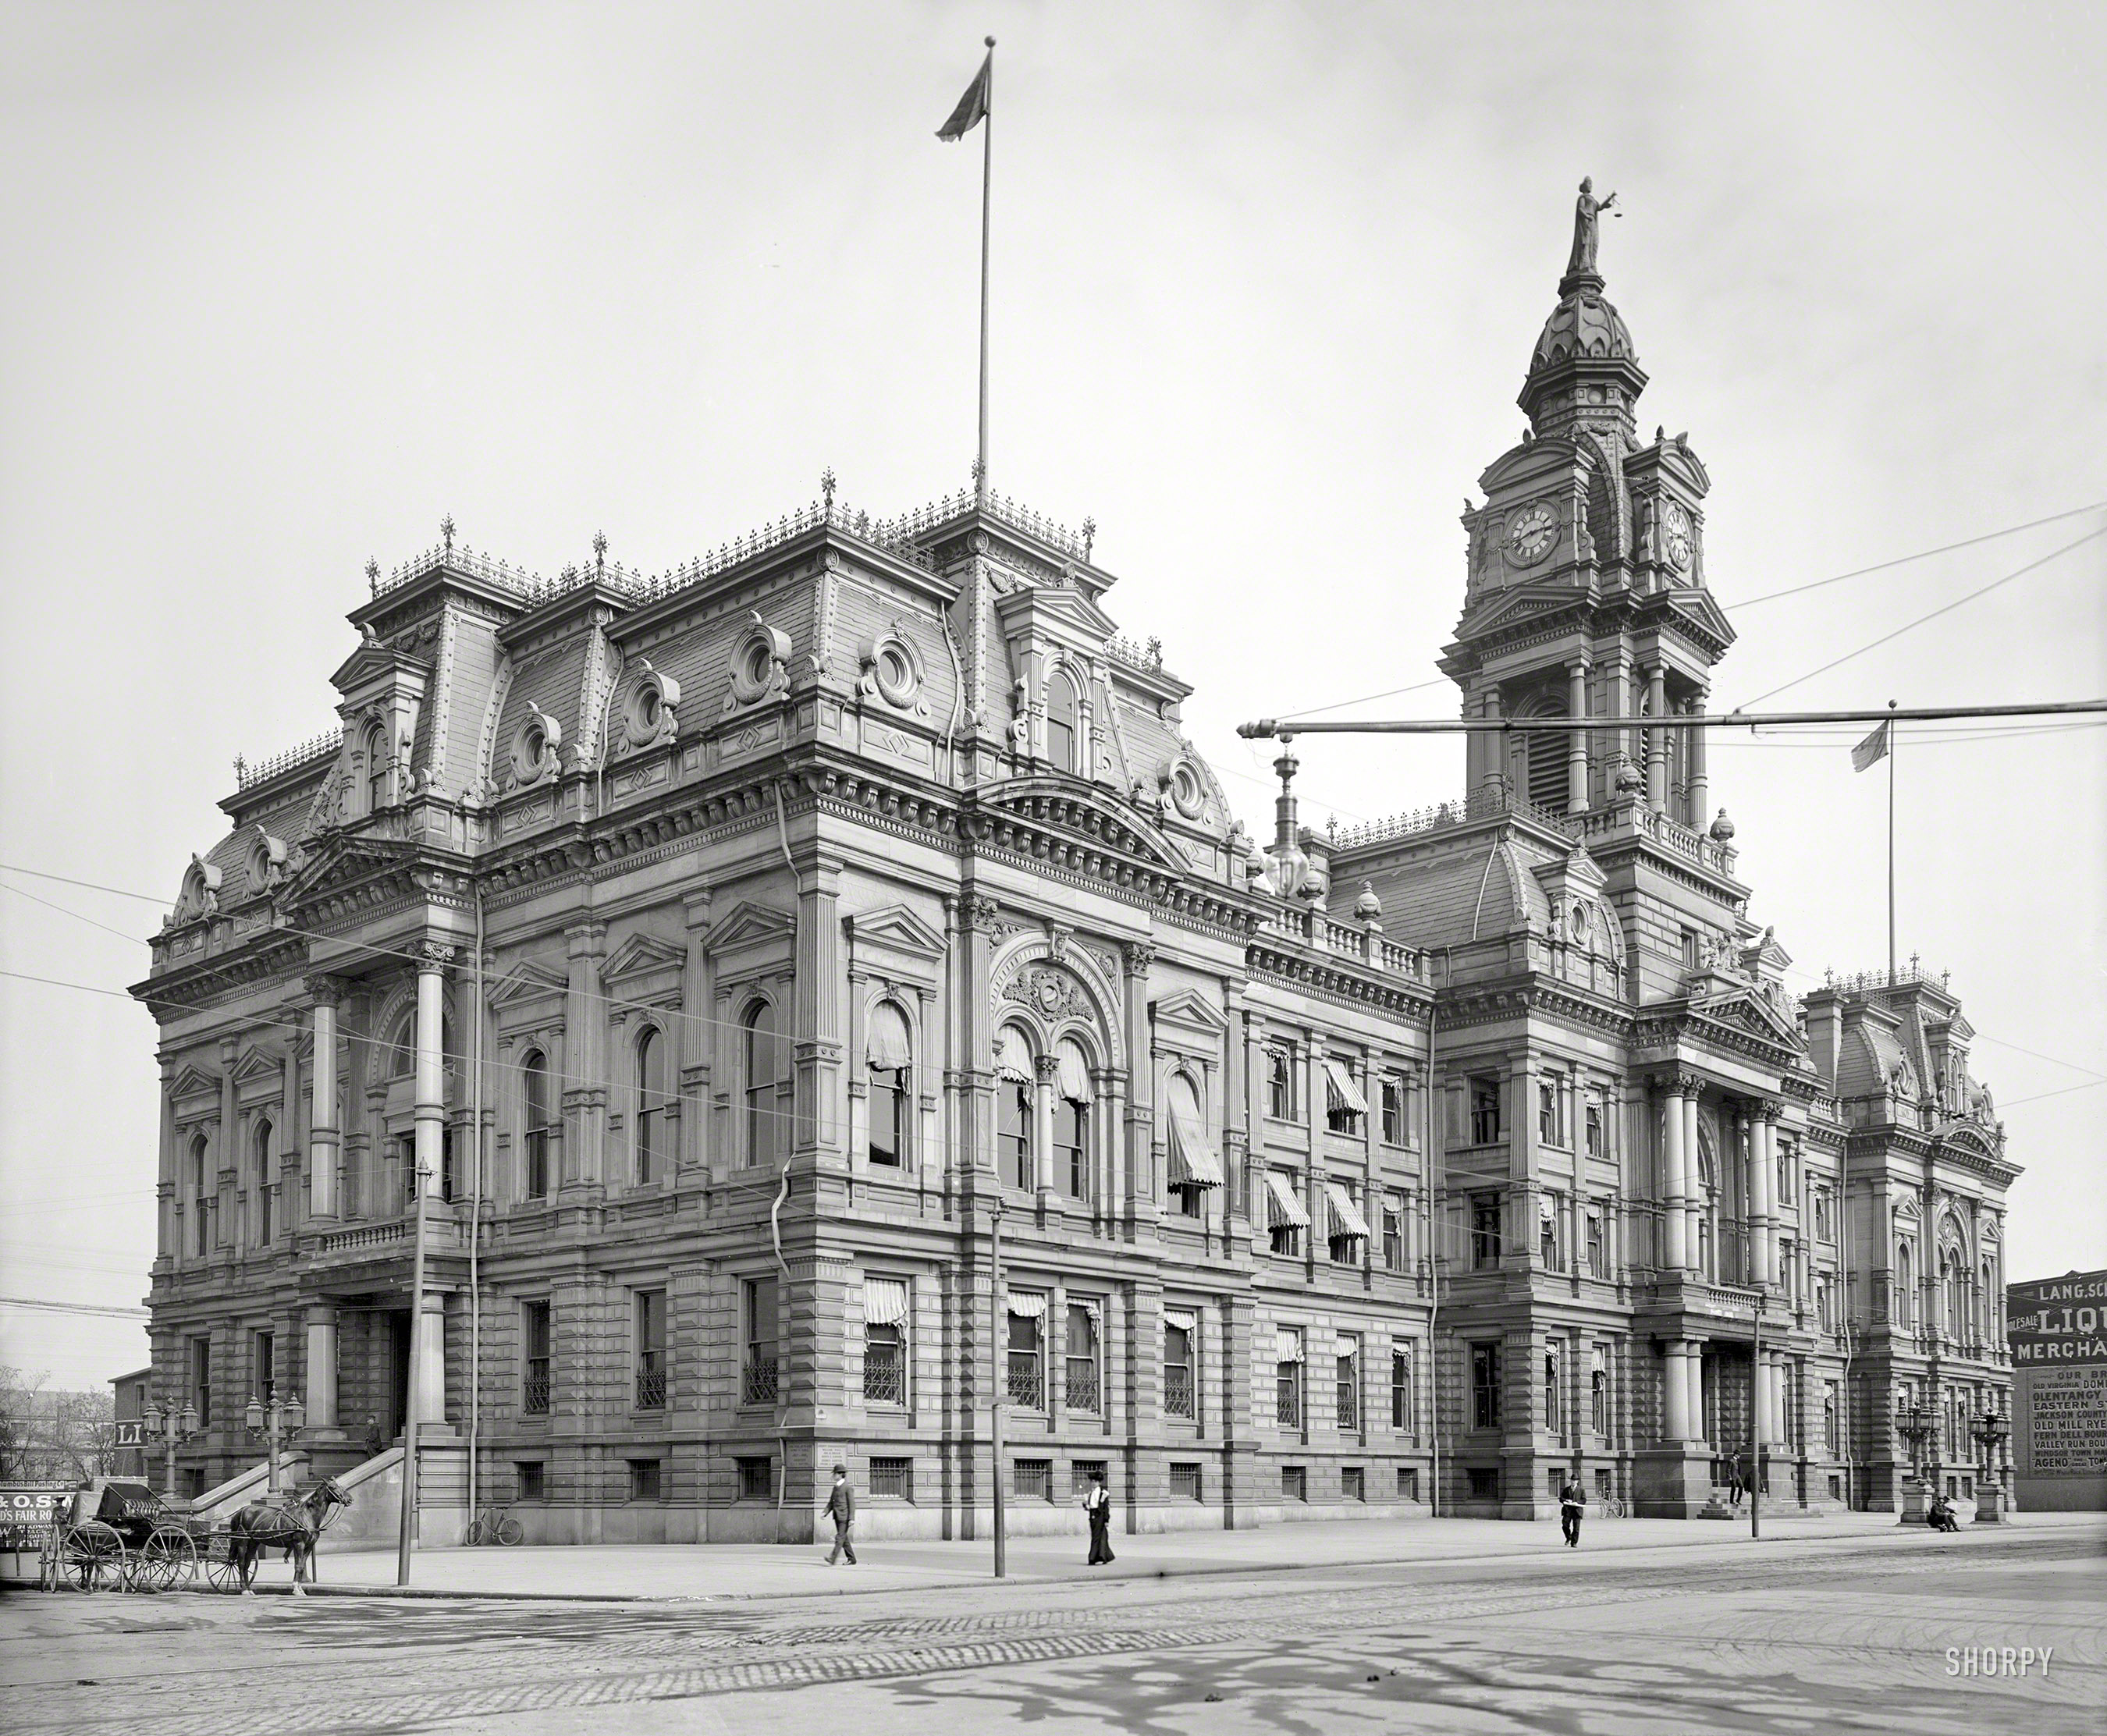 1904. "Courthouse -- Columbus, O." Continuing today's Columbian theme. 8x10 inch dry plate glass negative, Detroit Publishing Company. View full size.